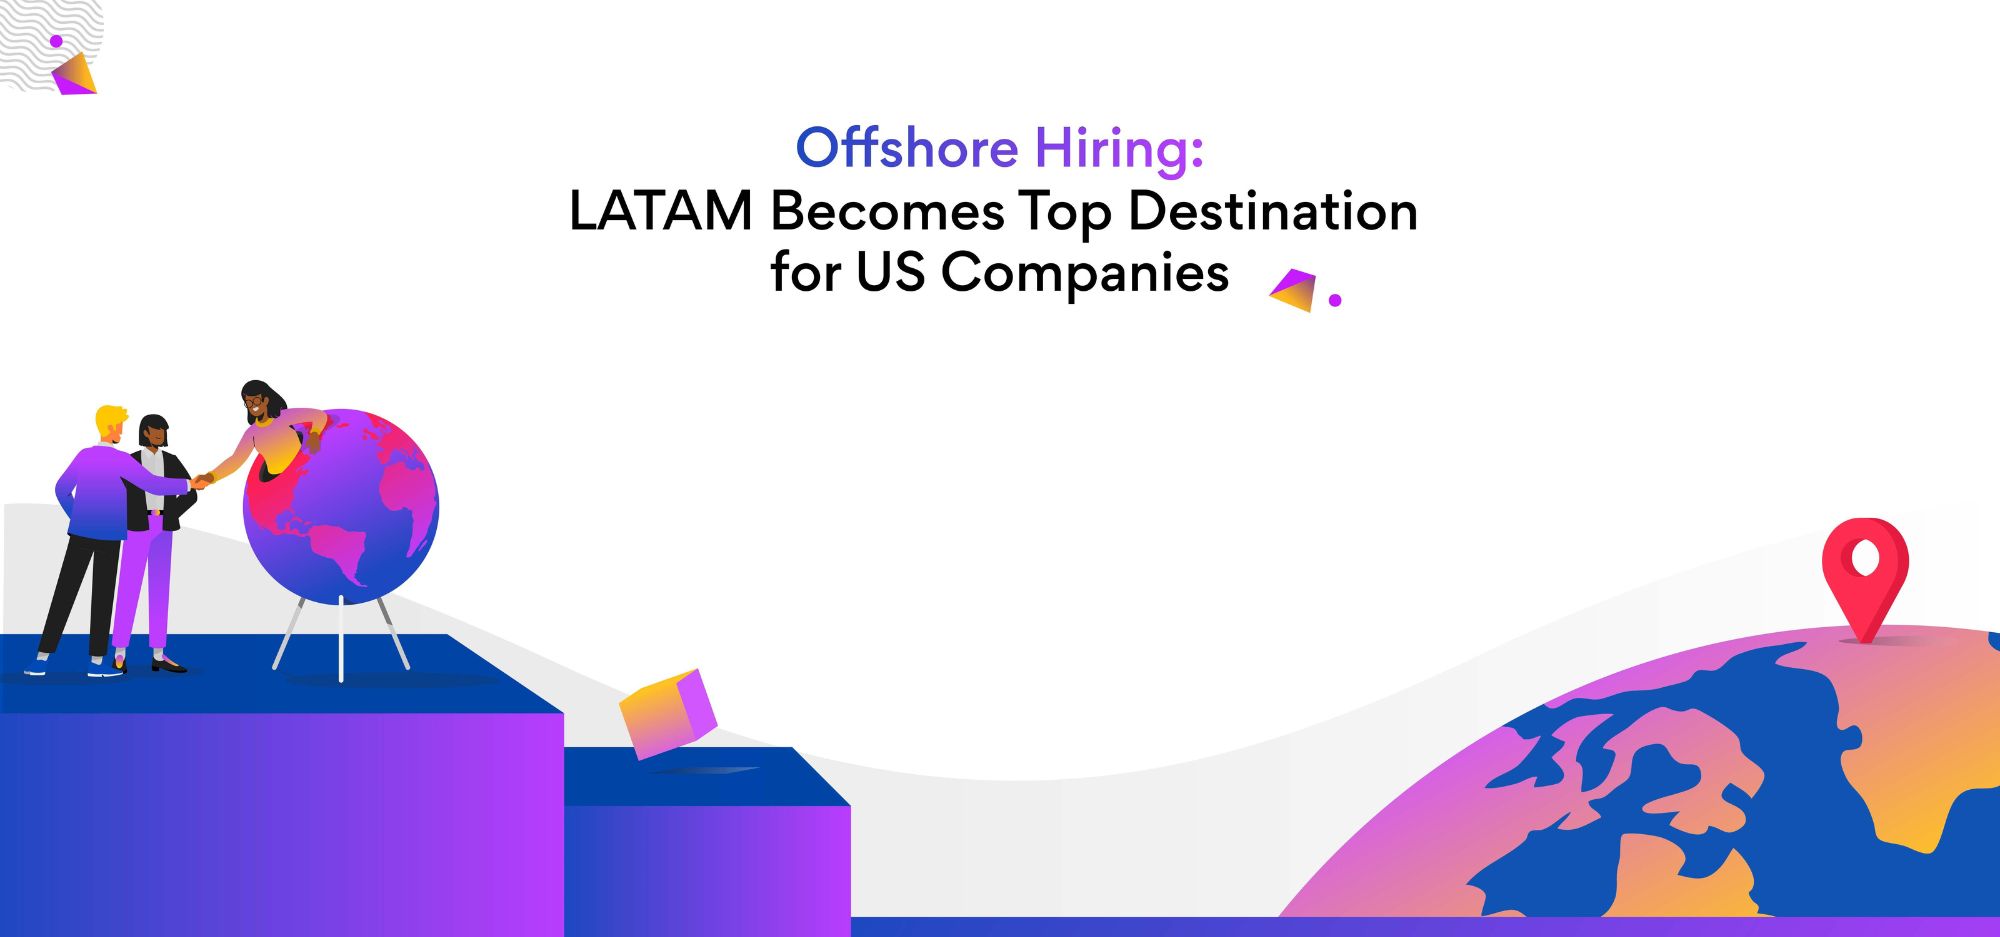 Offshore hiring LATAM becomes top destination for US companies